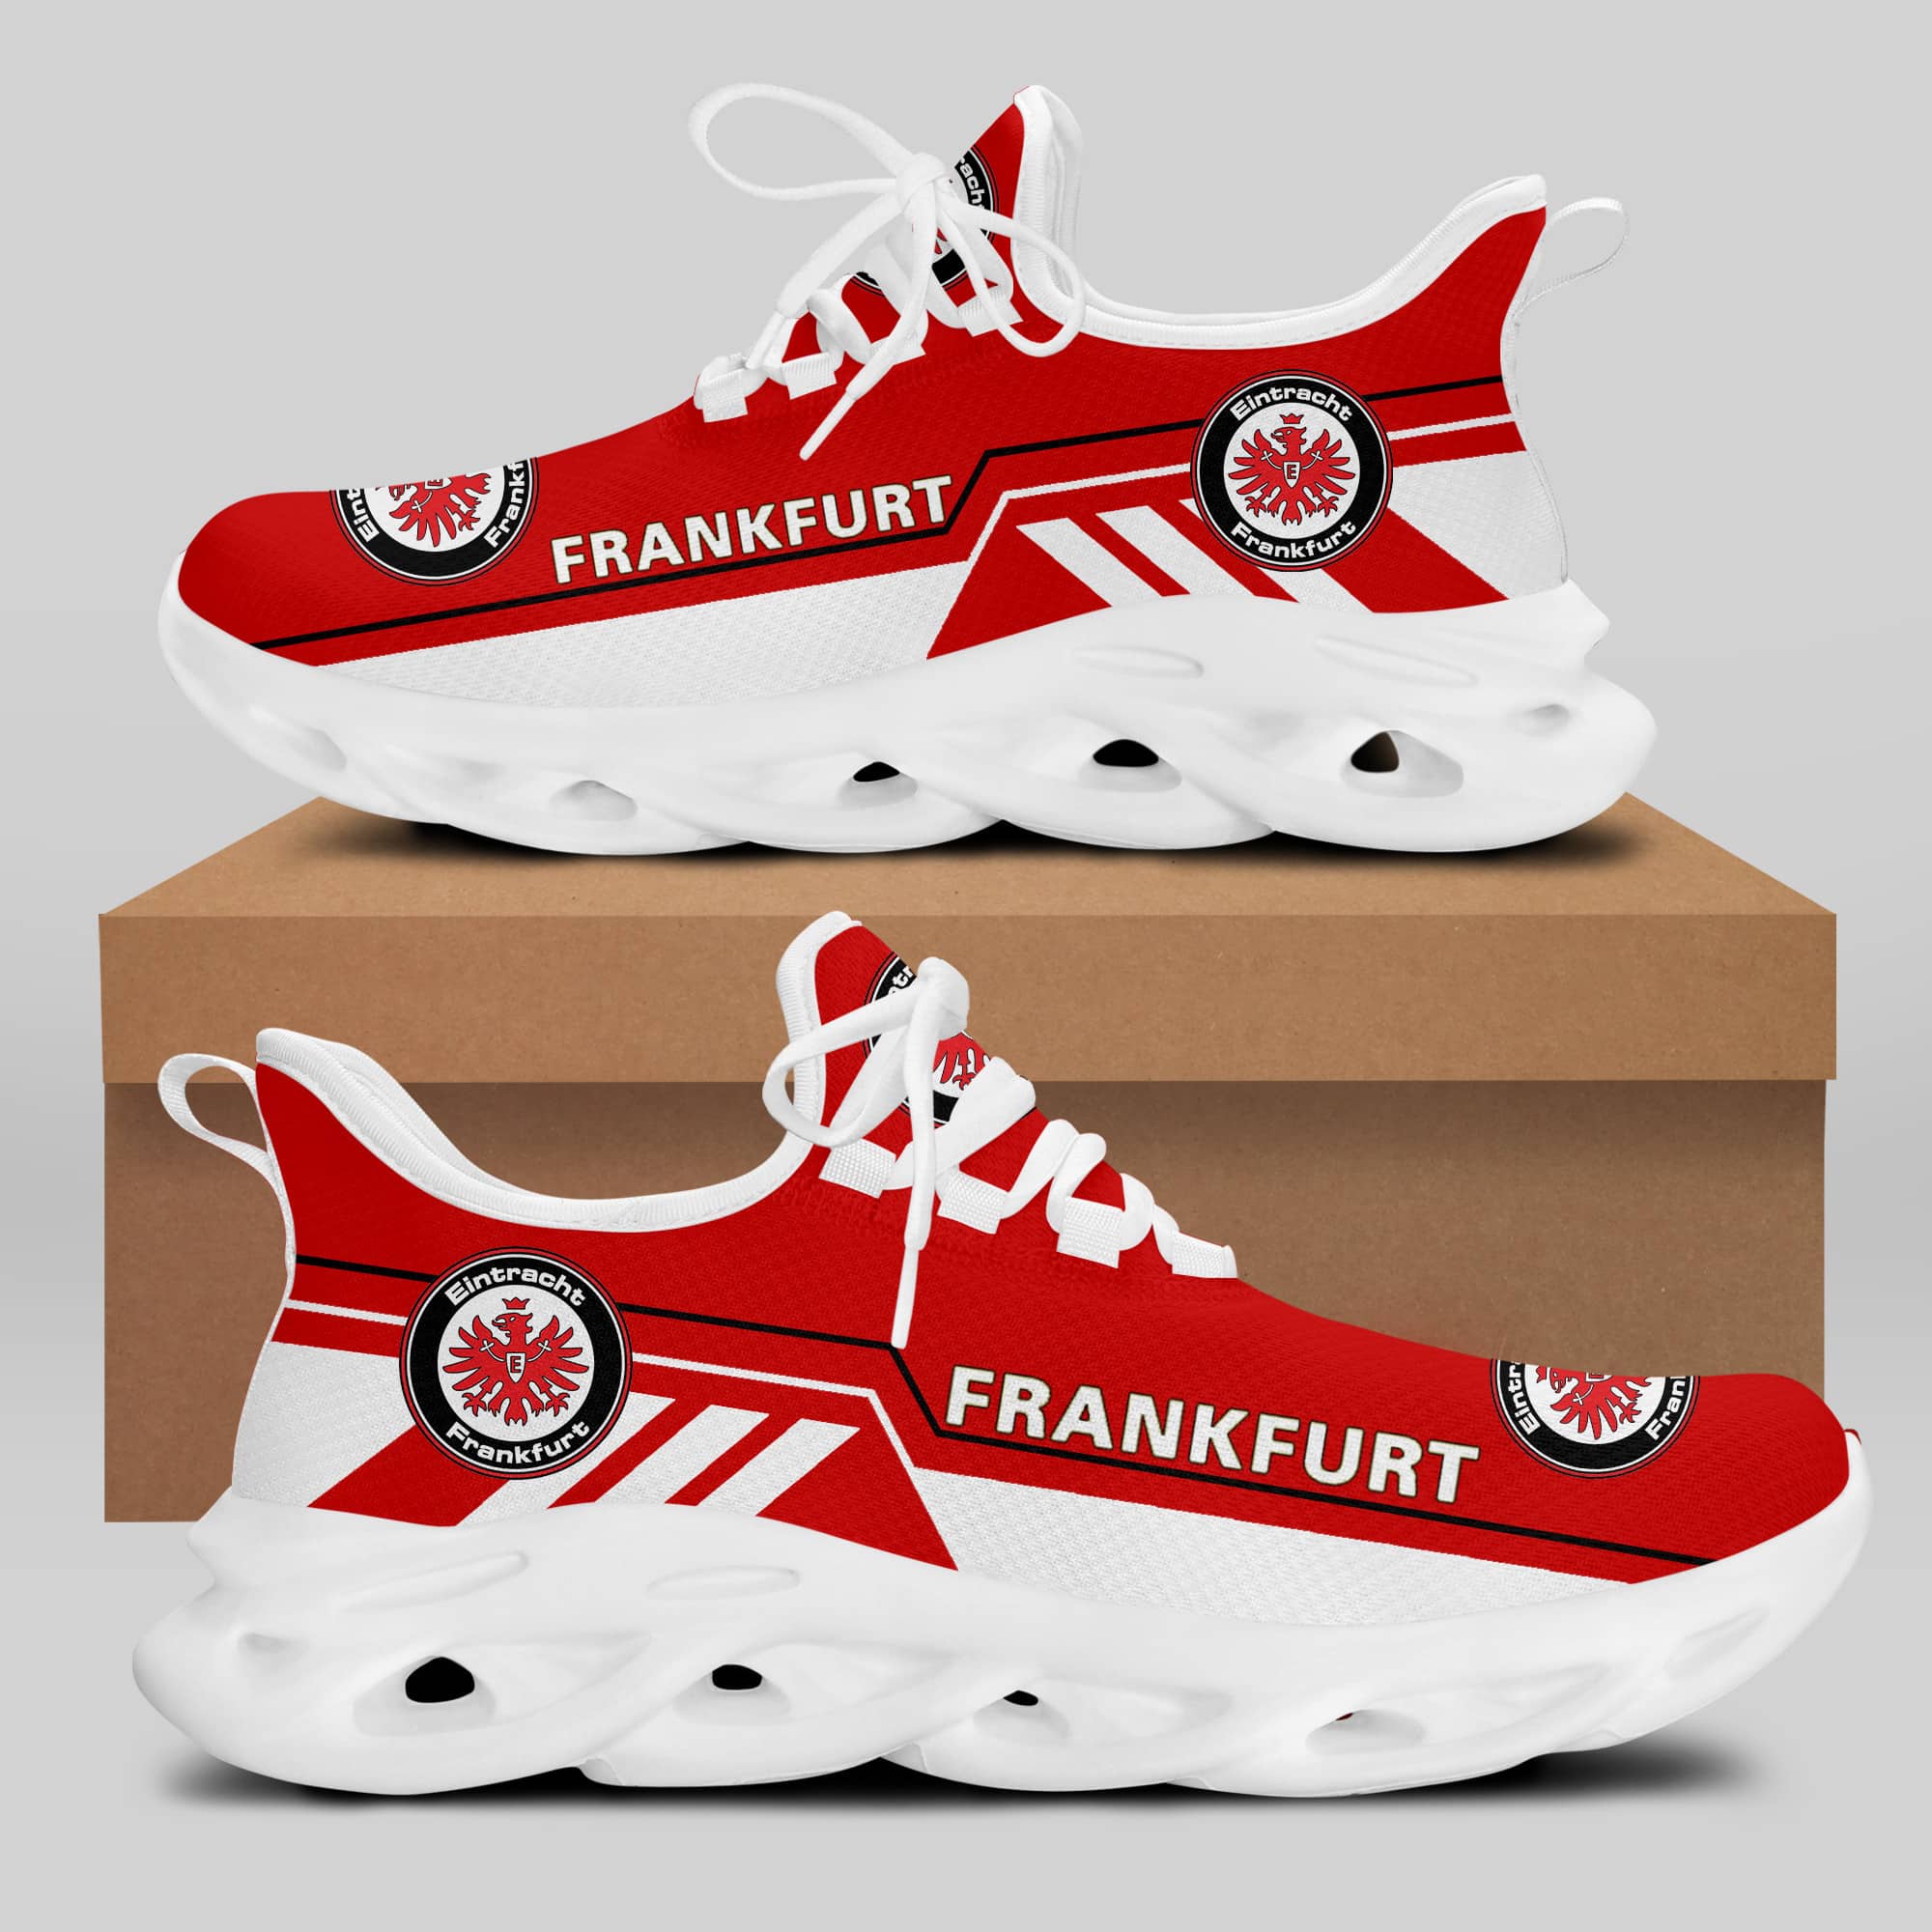 Eintracht Frankfurt Running Shoes Max Soul Shoes Sneakers Ver 11 1